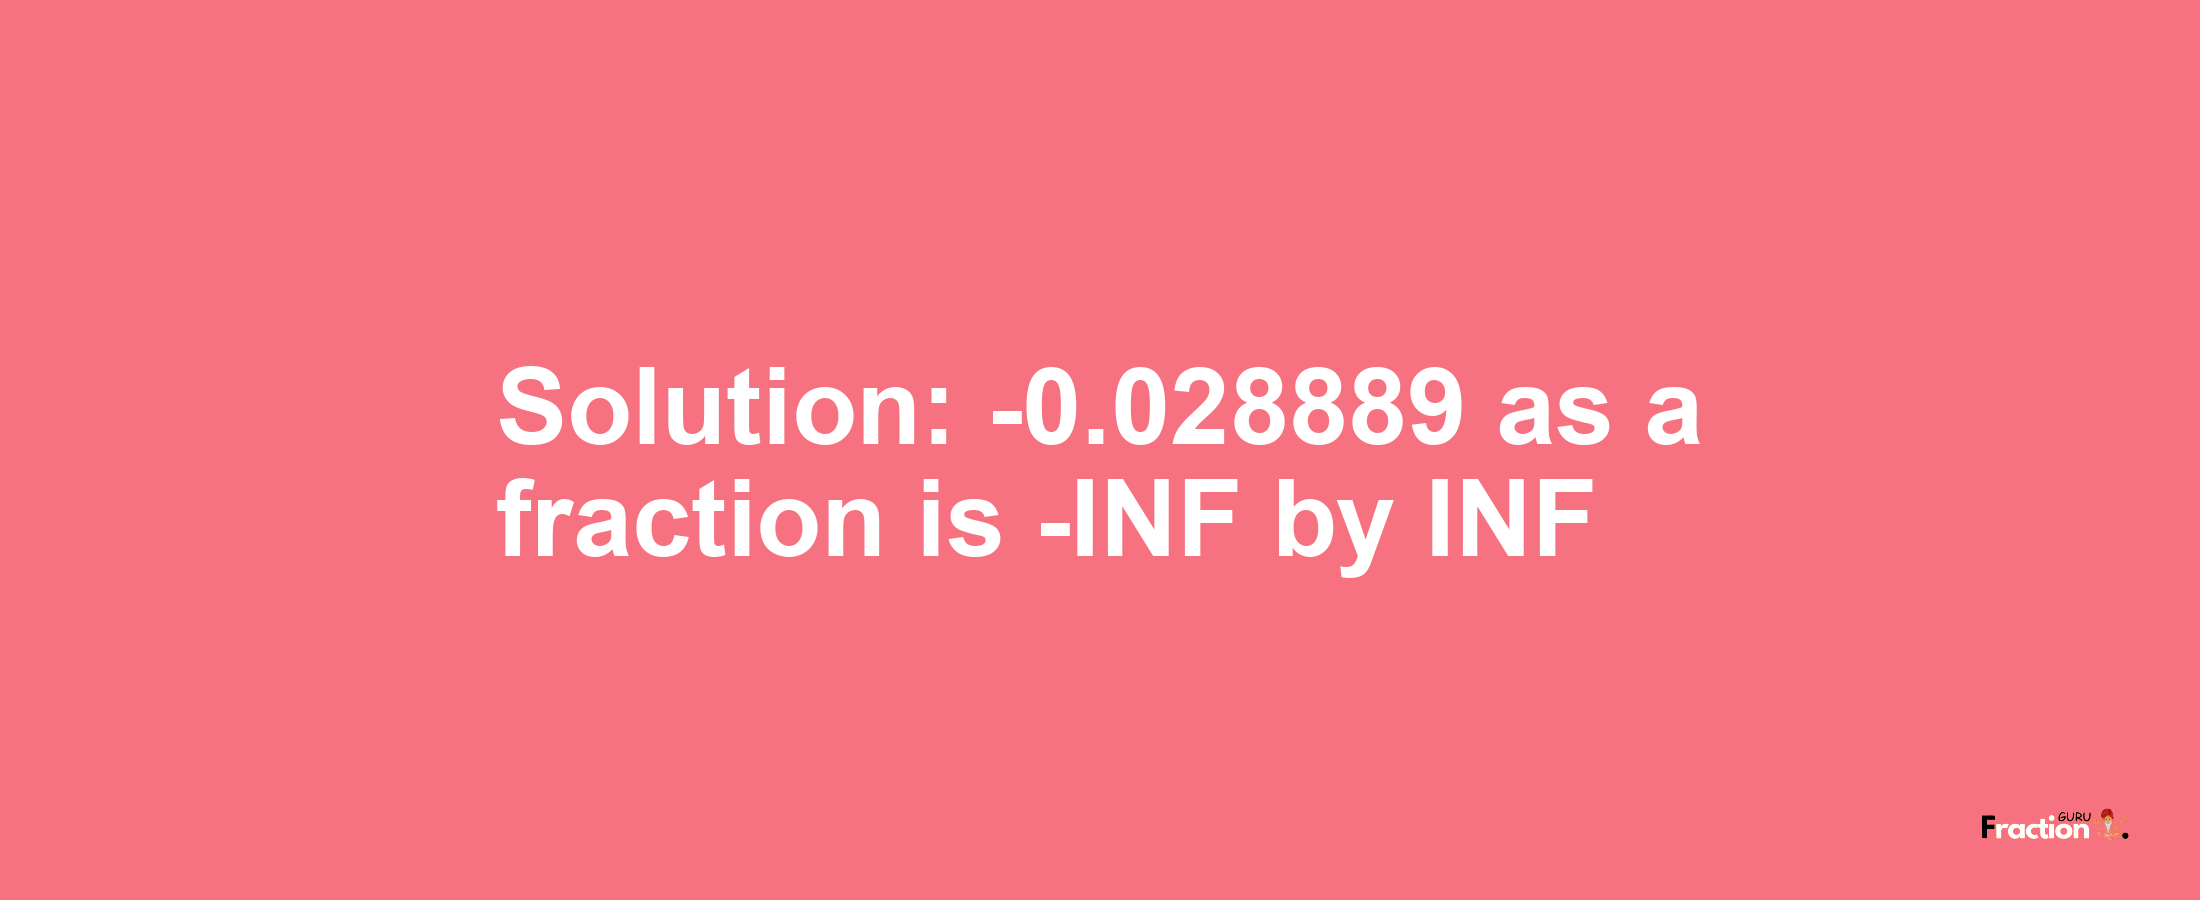 Solution:-0.028889 as a fraction is -INF/INF